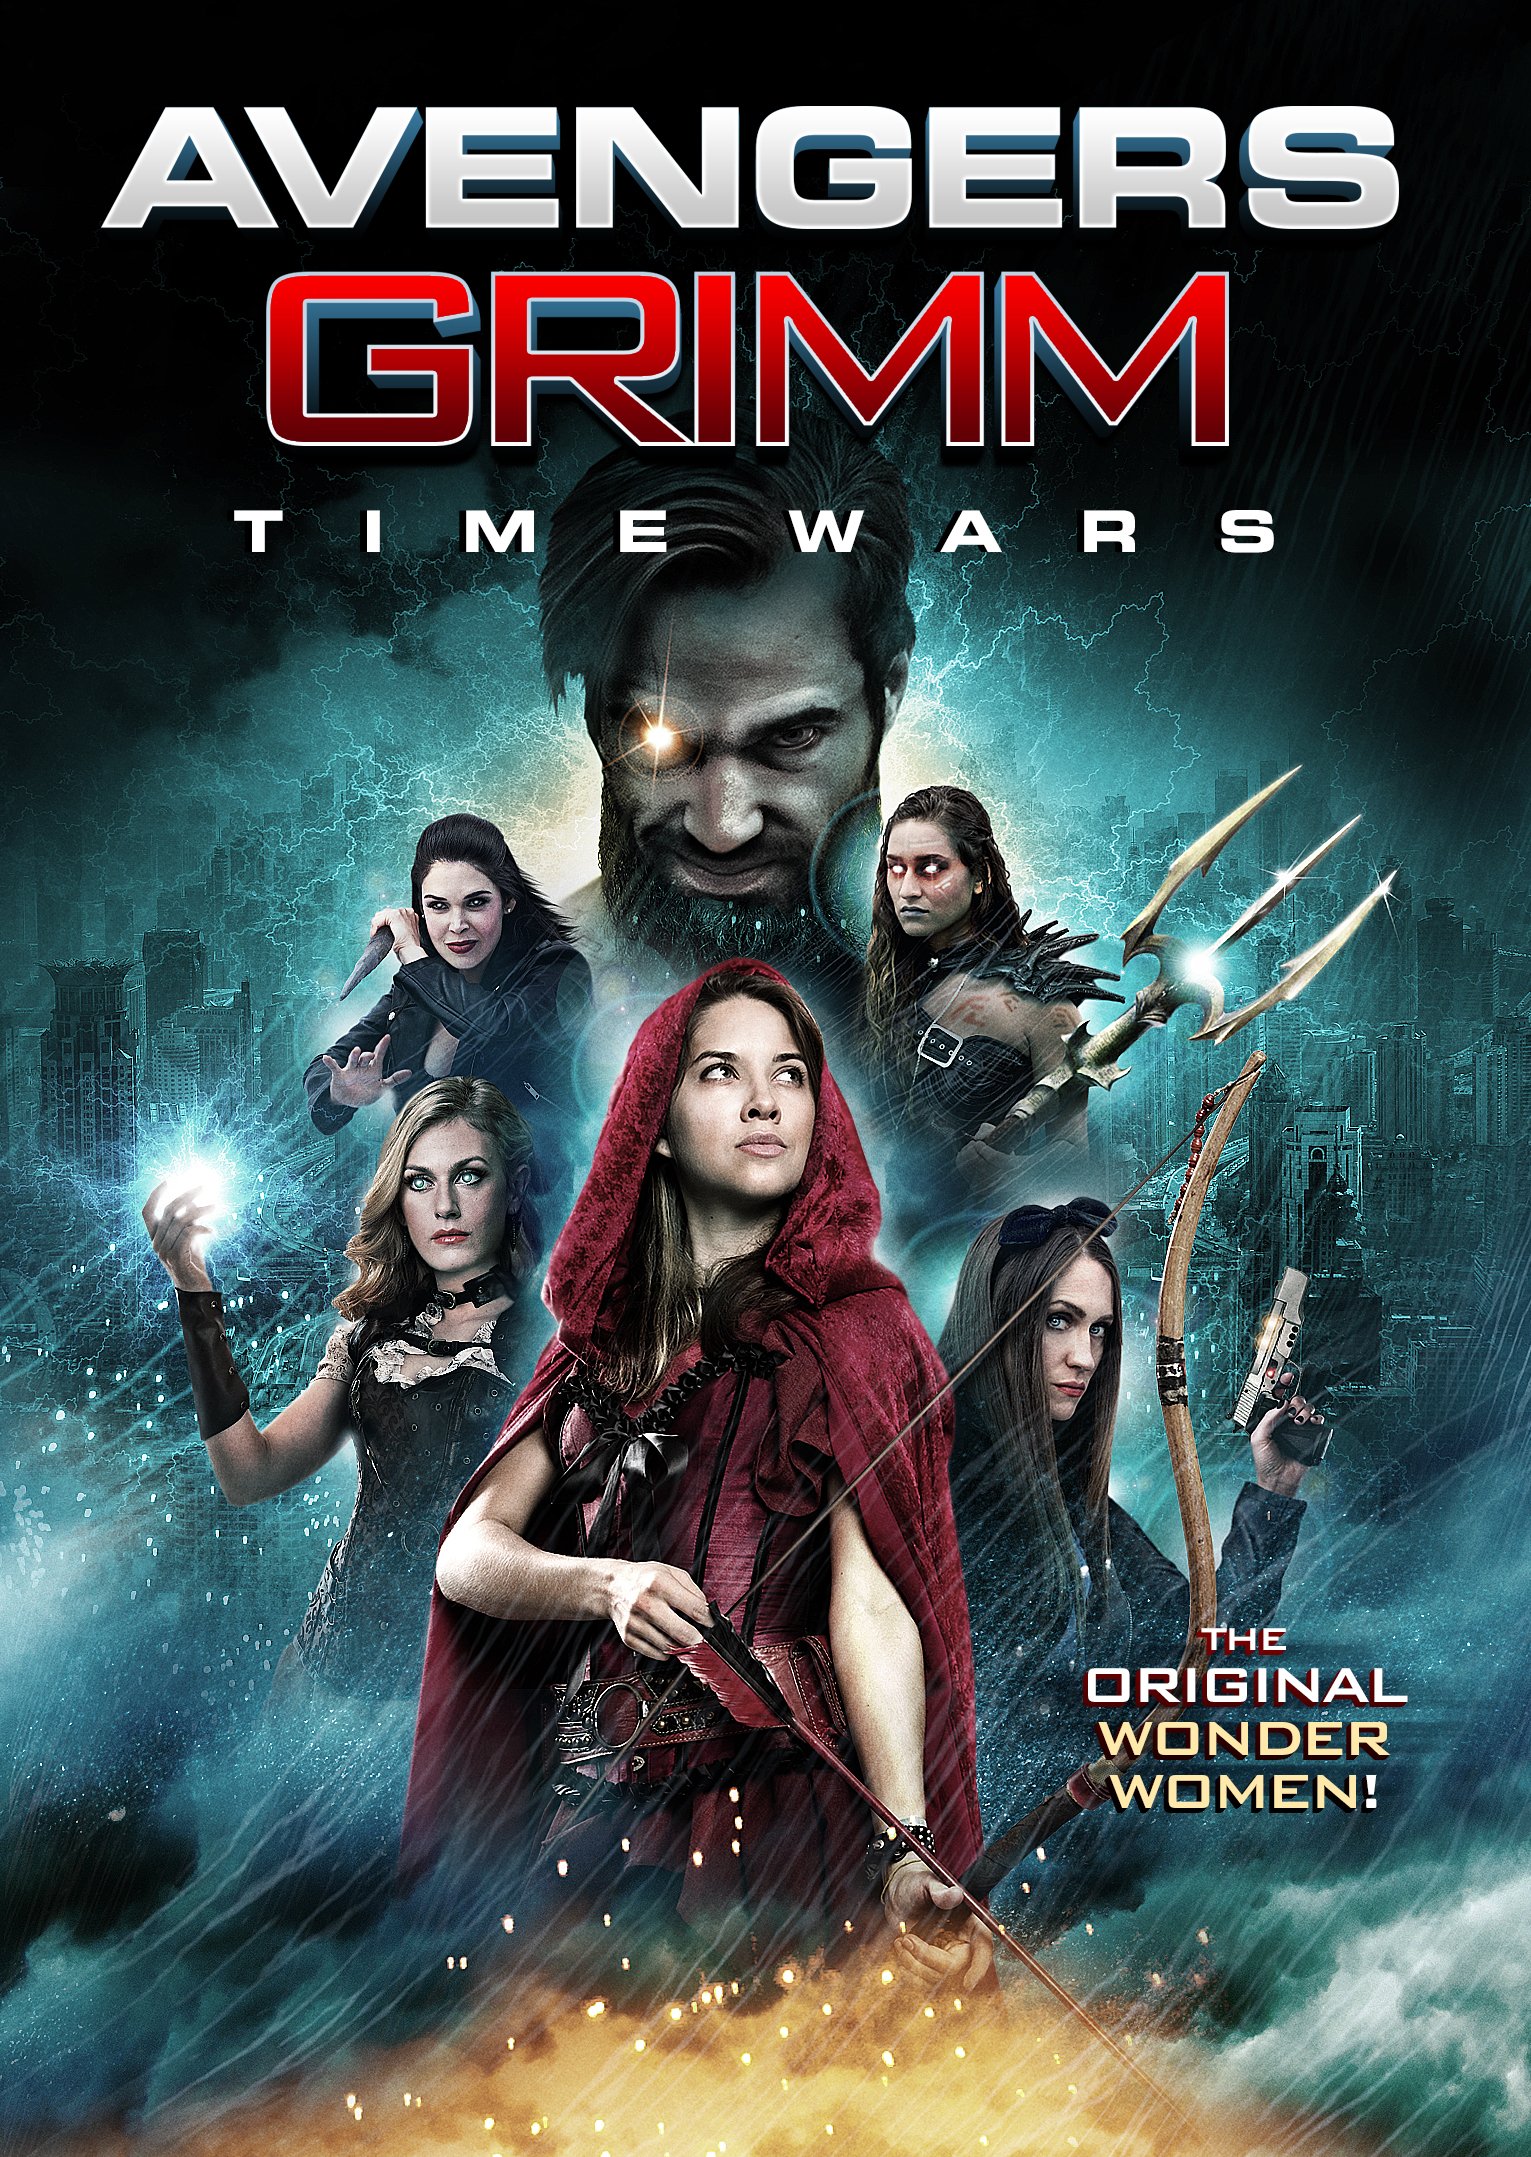 Avengers Grimm 2 Time Wars (2018)